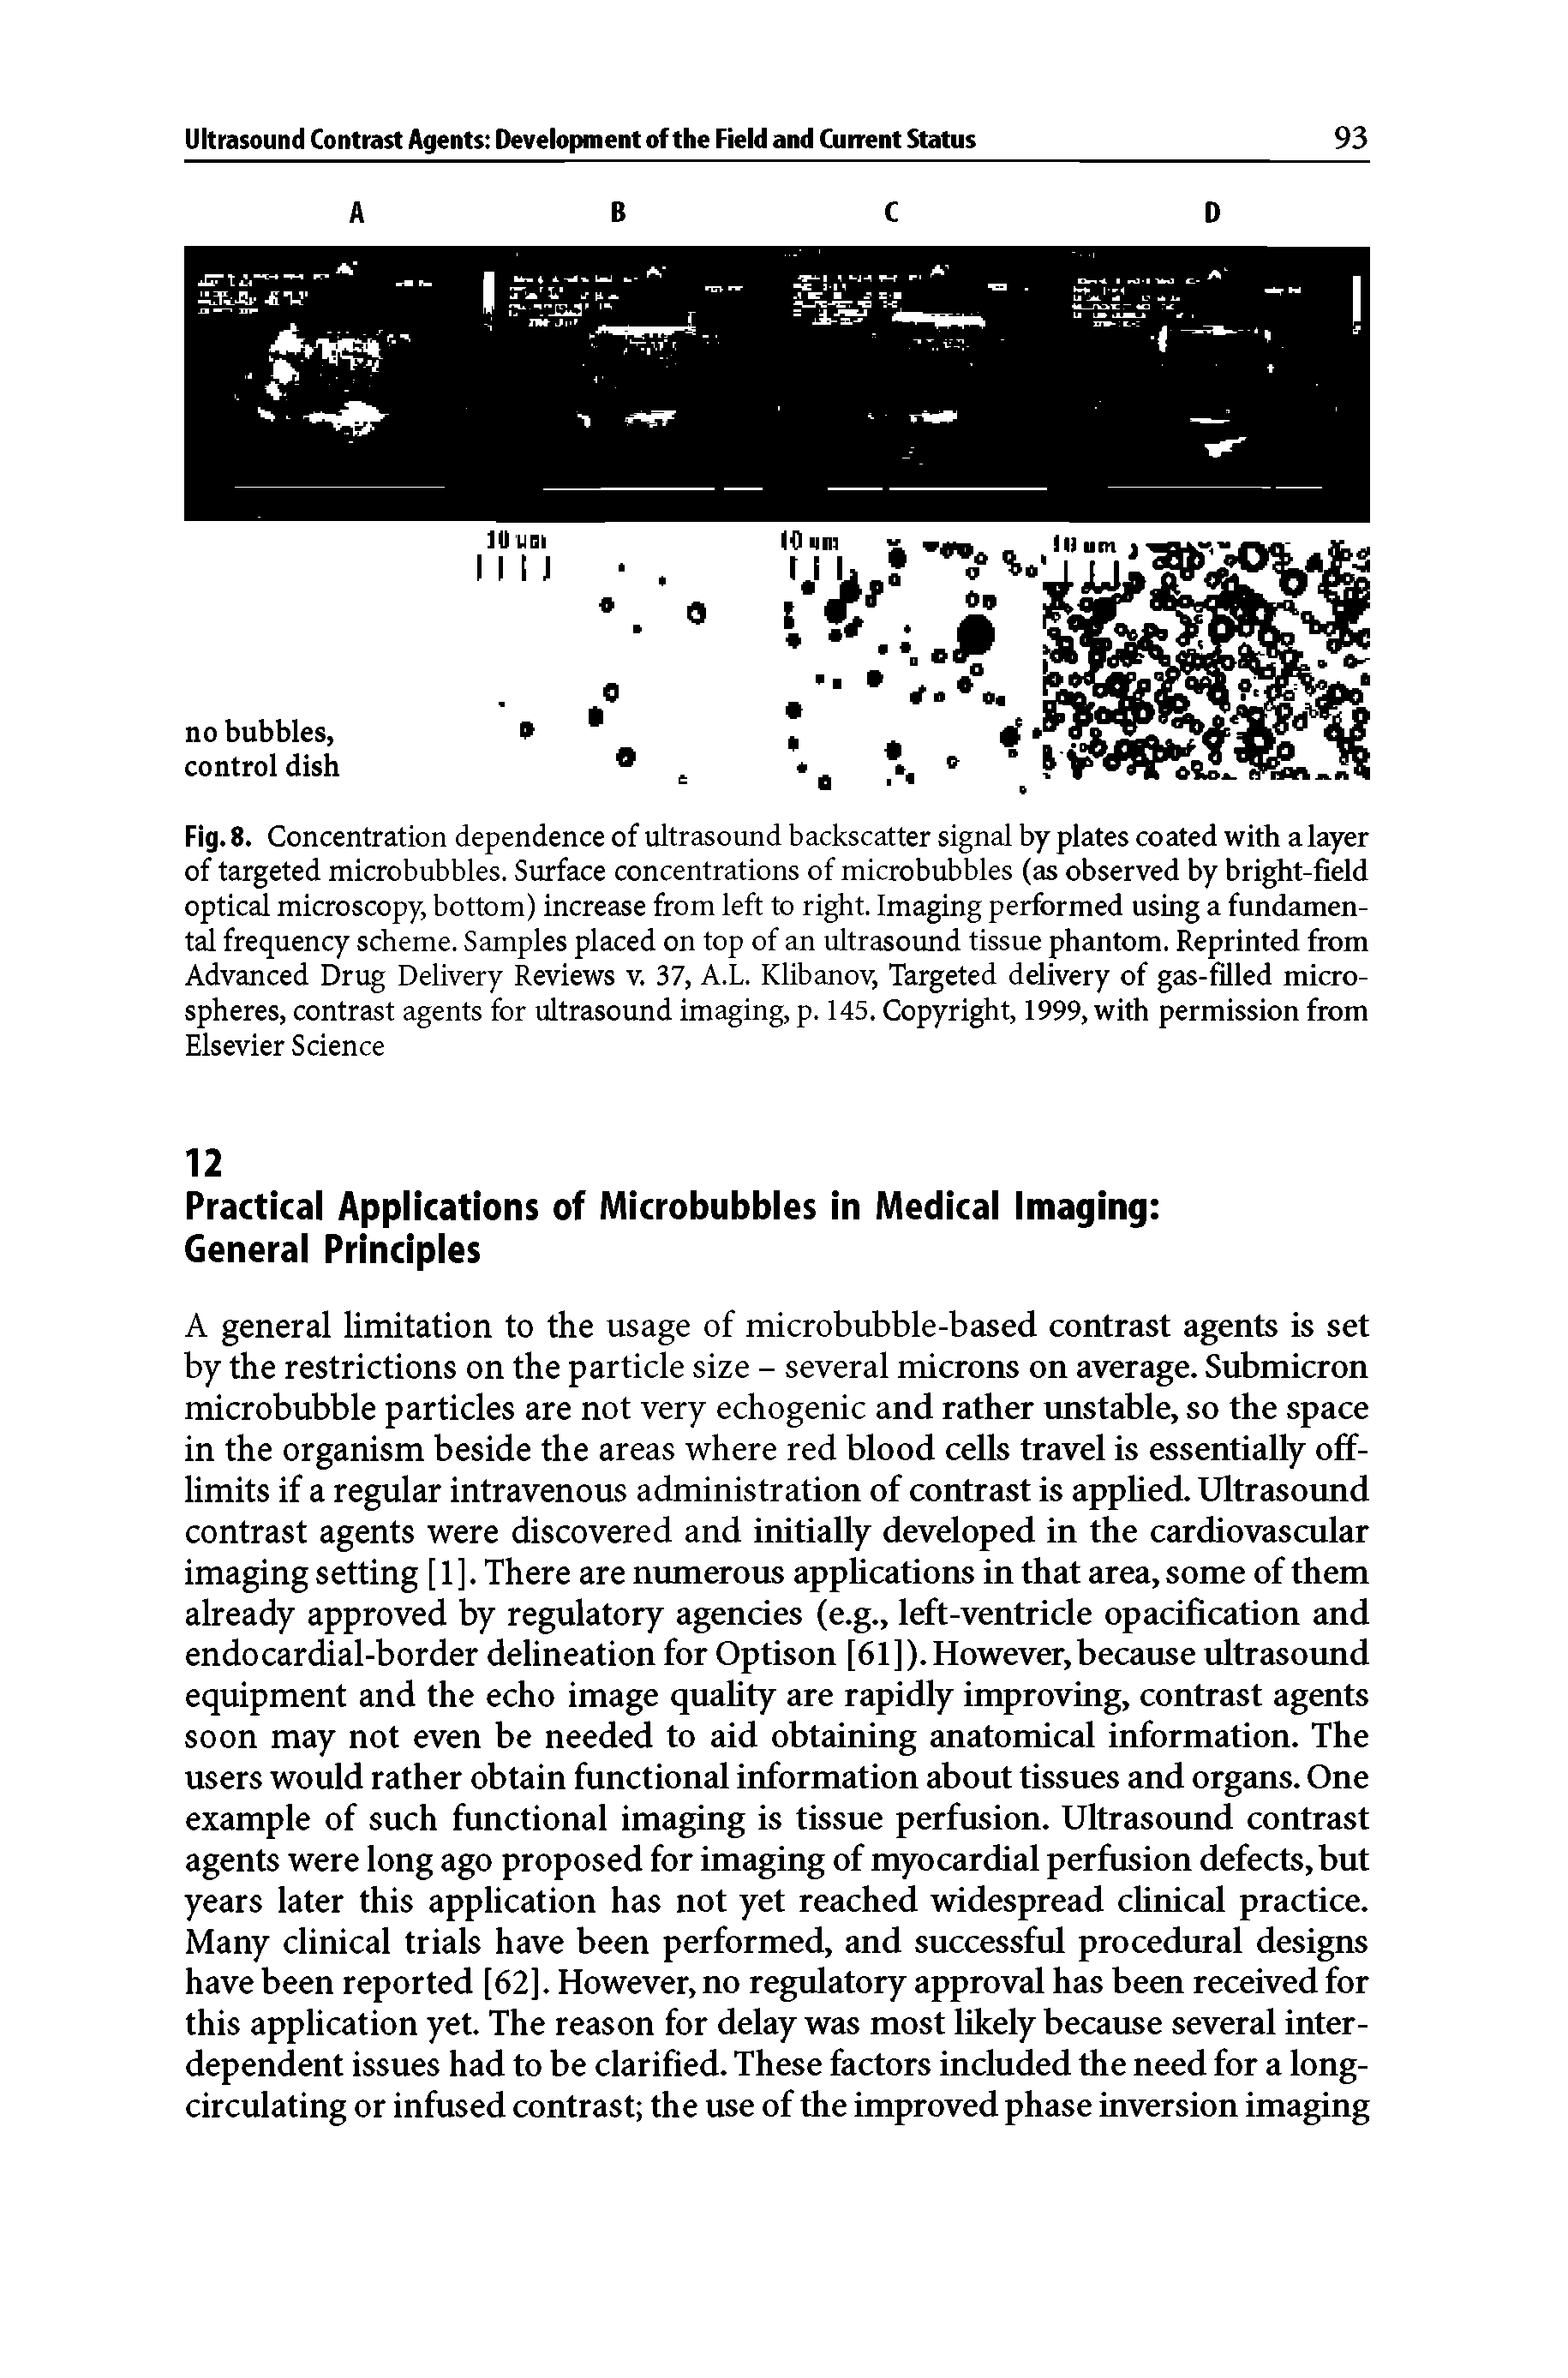 Fig. 8. Concentration dependence of ultrasound backscatter signal by plates coated with a layer of targeted microbubbles. Surface concentrations of microbubbles (as observed by bright-field optical microscopy, bottom) increase from left to right. Imaging performed using a fundamental frequency scheme. Samples placed on top of an ultrasound tissue phantom. Reprinted from Advanced Drug Delivery Reviews v. 37, A.L. Klibanov, Targeted delivery of gas-filled microspheres, contrast agents for ultrasound imaging, p. 145. Copyright, 1999, with permission from Elsevier Science...